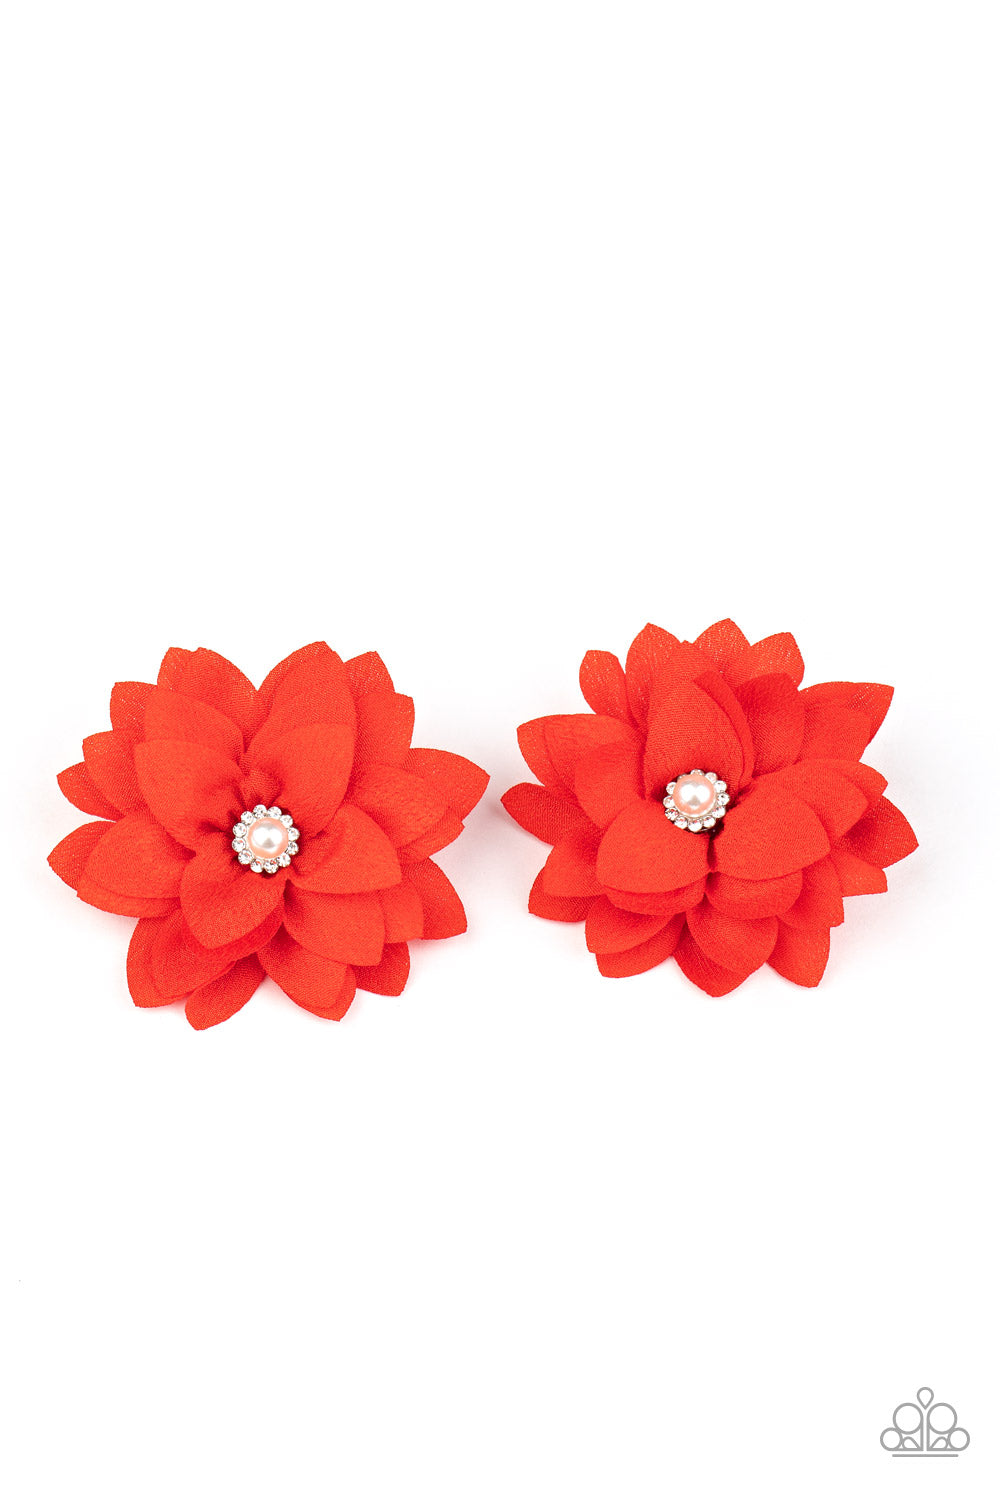 Things That Go BLOOM! - Red Hair Clip